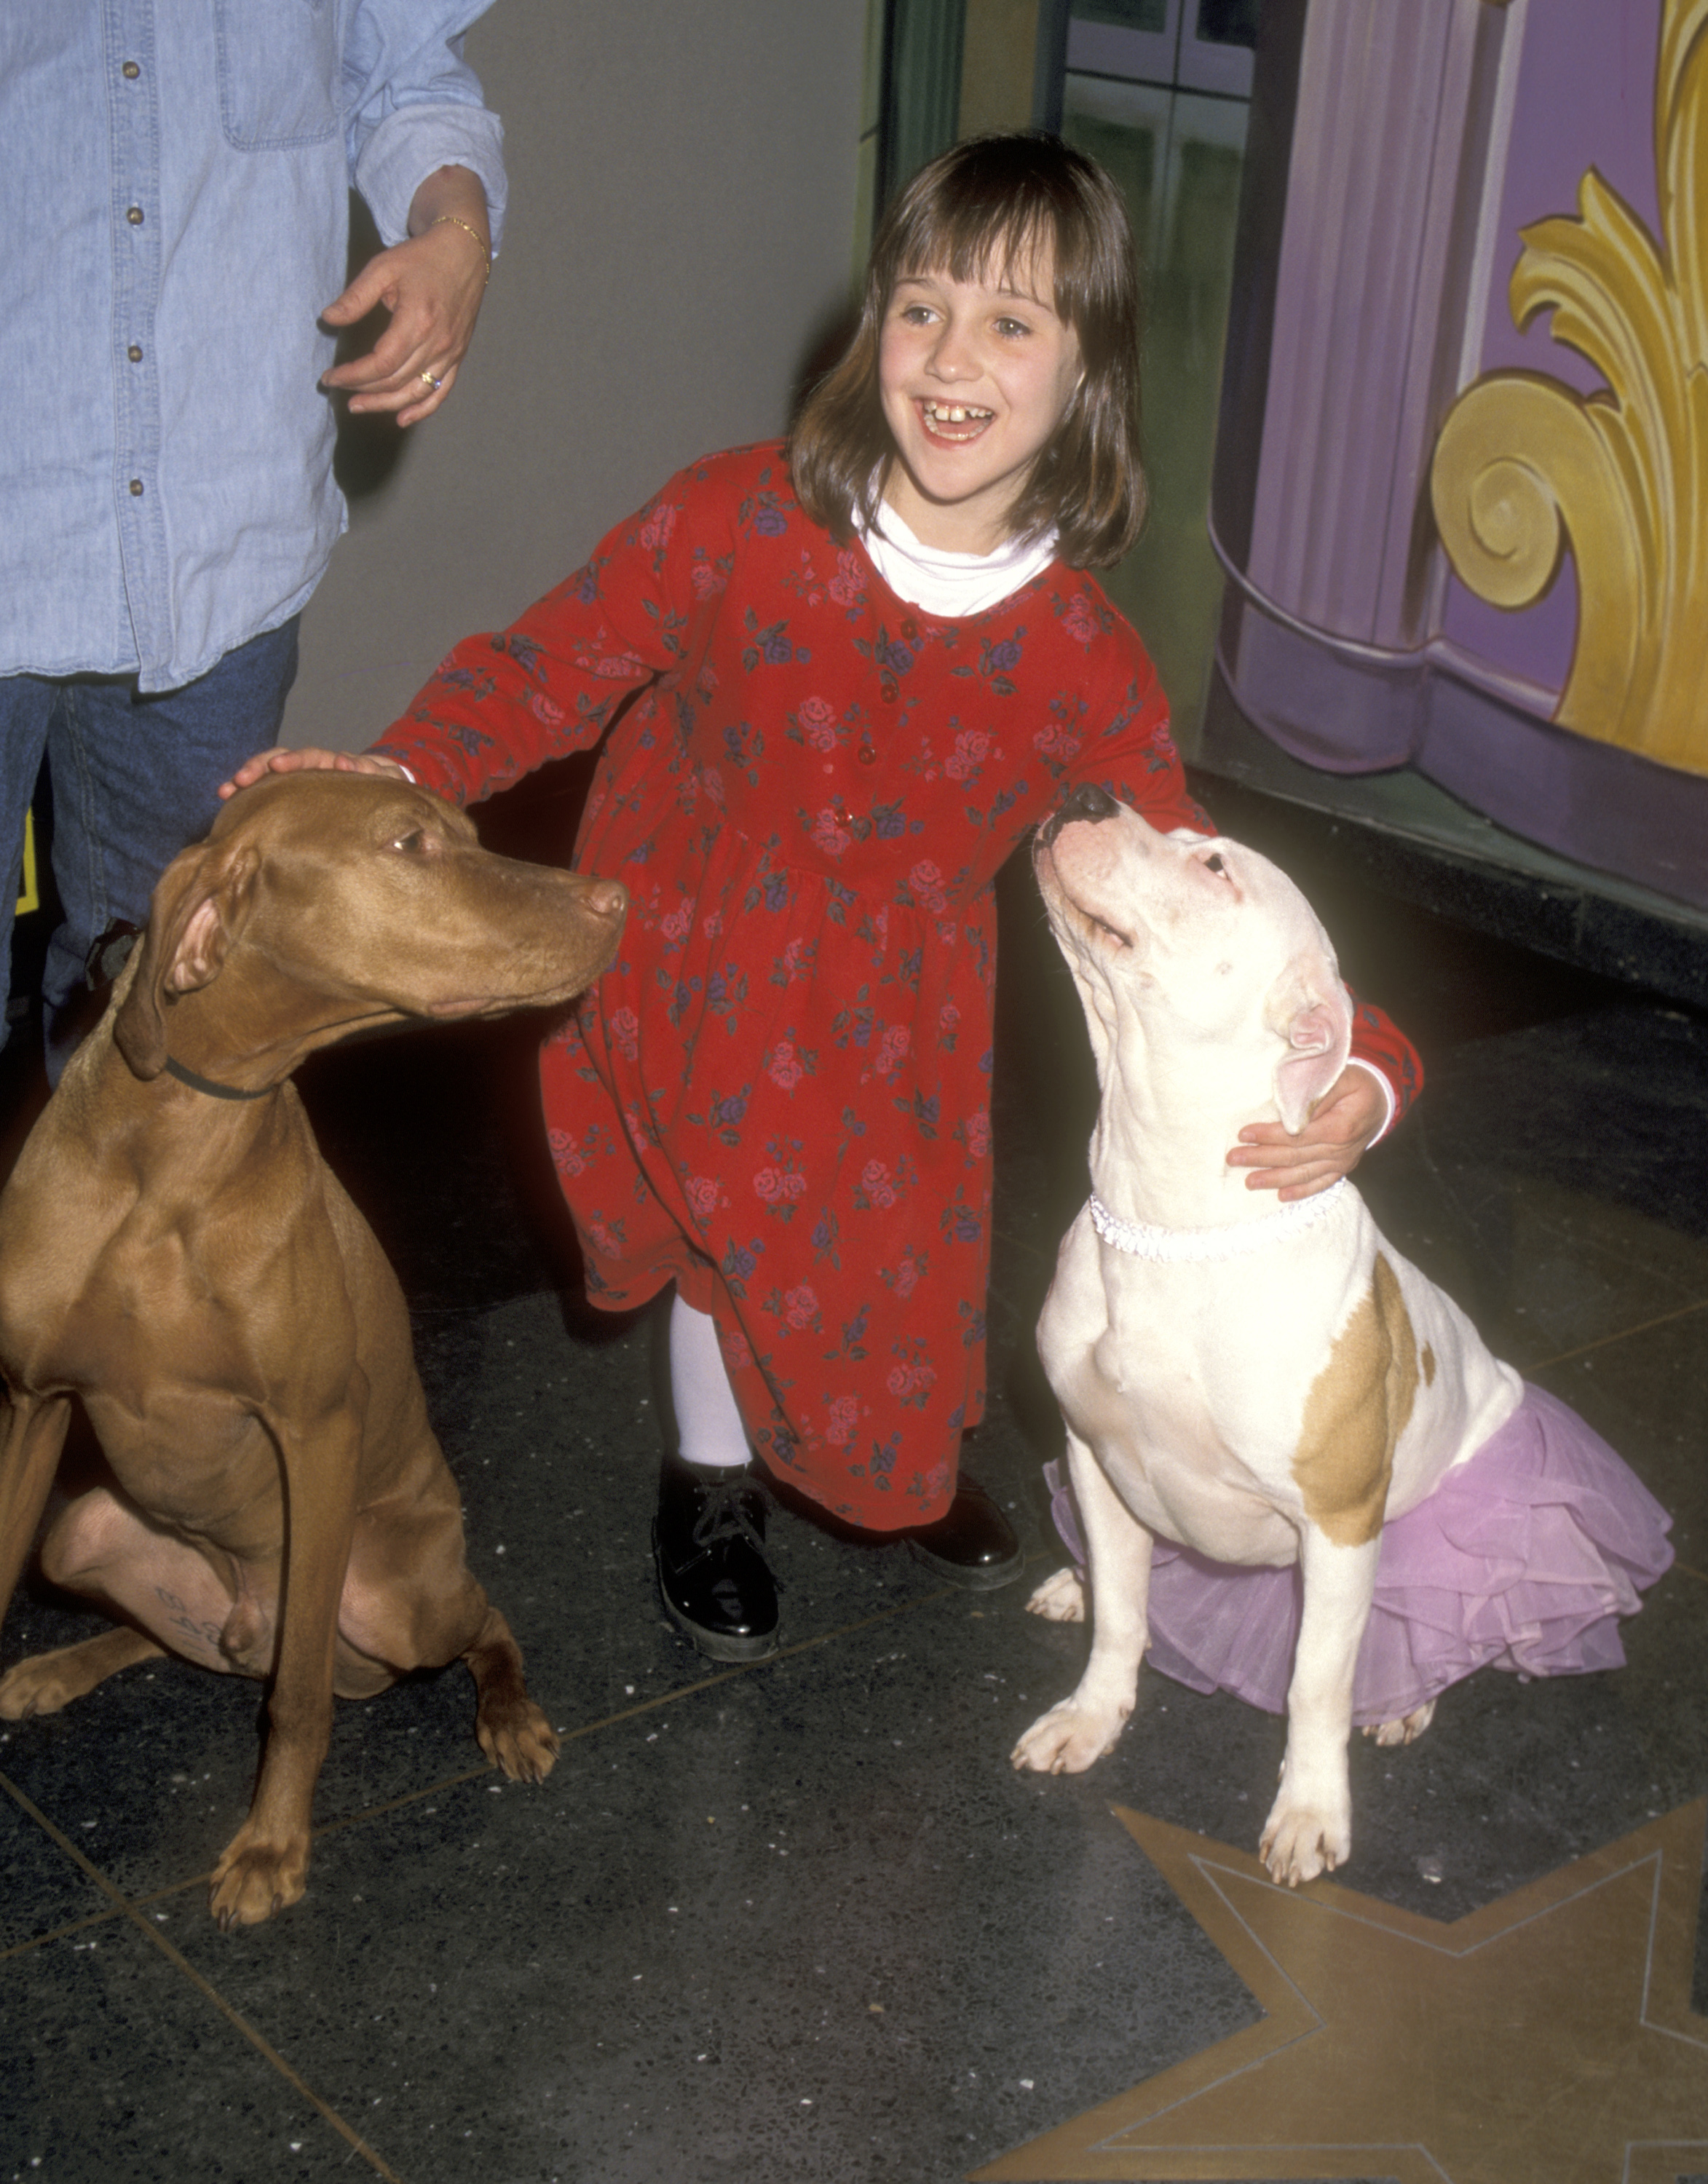 Mara Wilson attends the M&M's Candies Hollywood for Children Family Film Festival at Sony IMAX Theater on April 8, 1996 in New York City. | Source: Getty Images